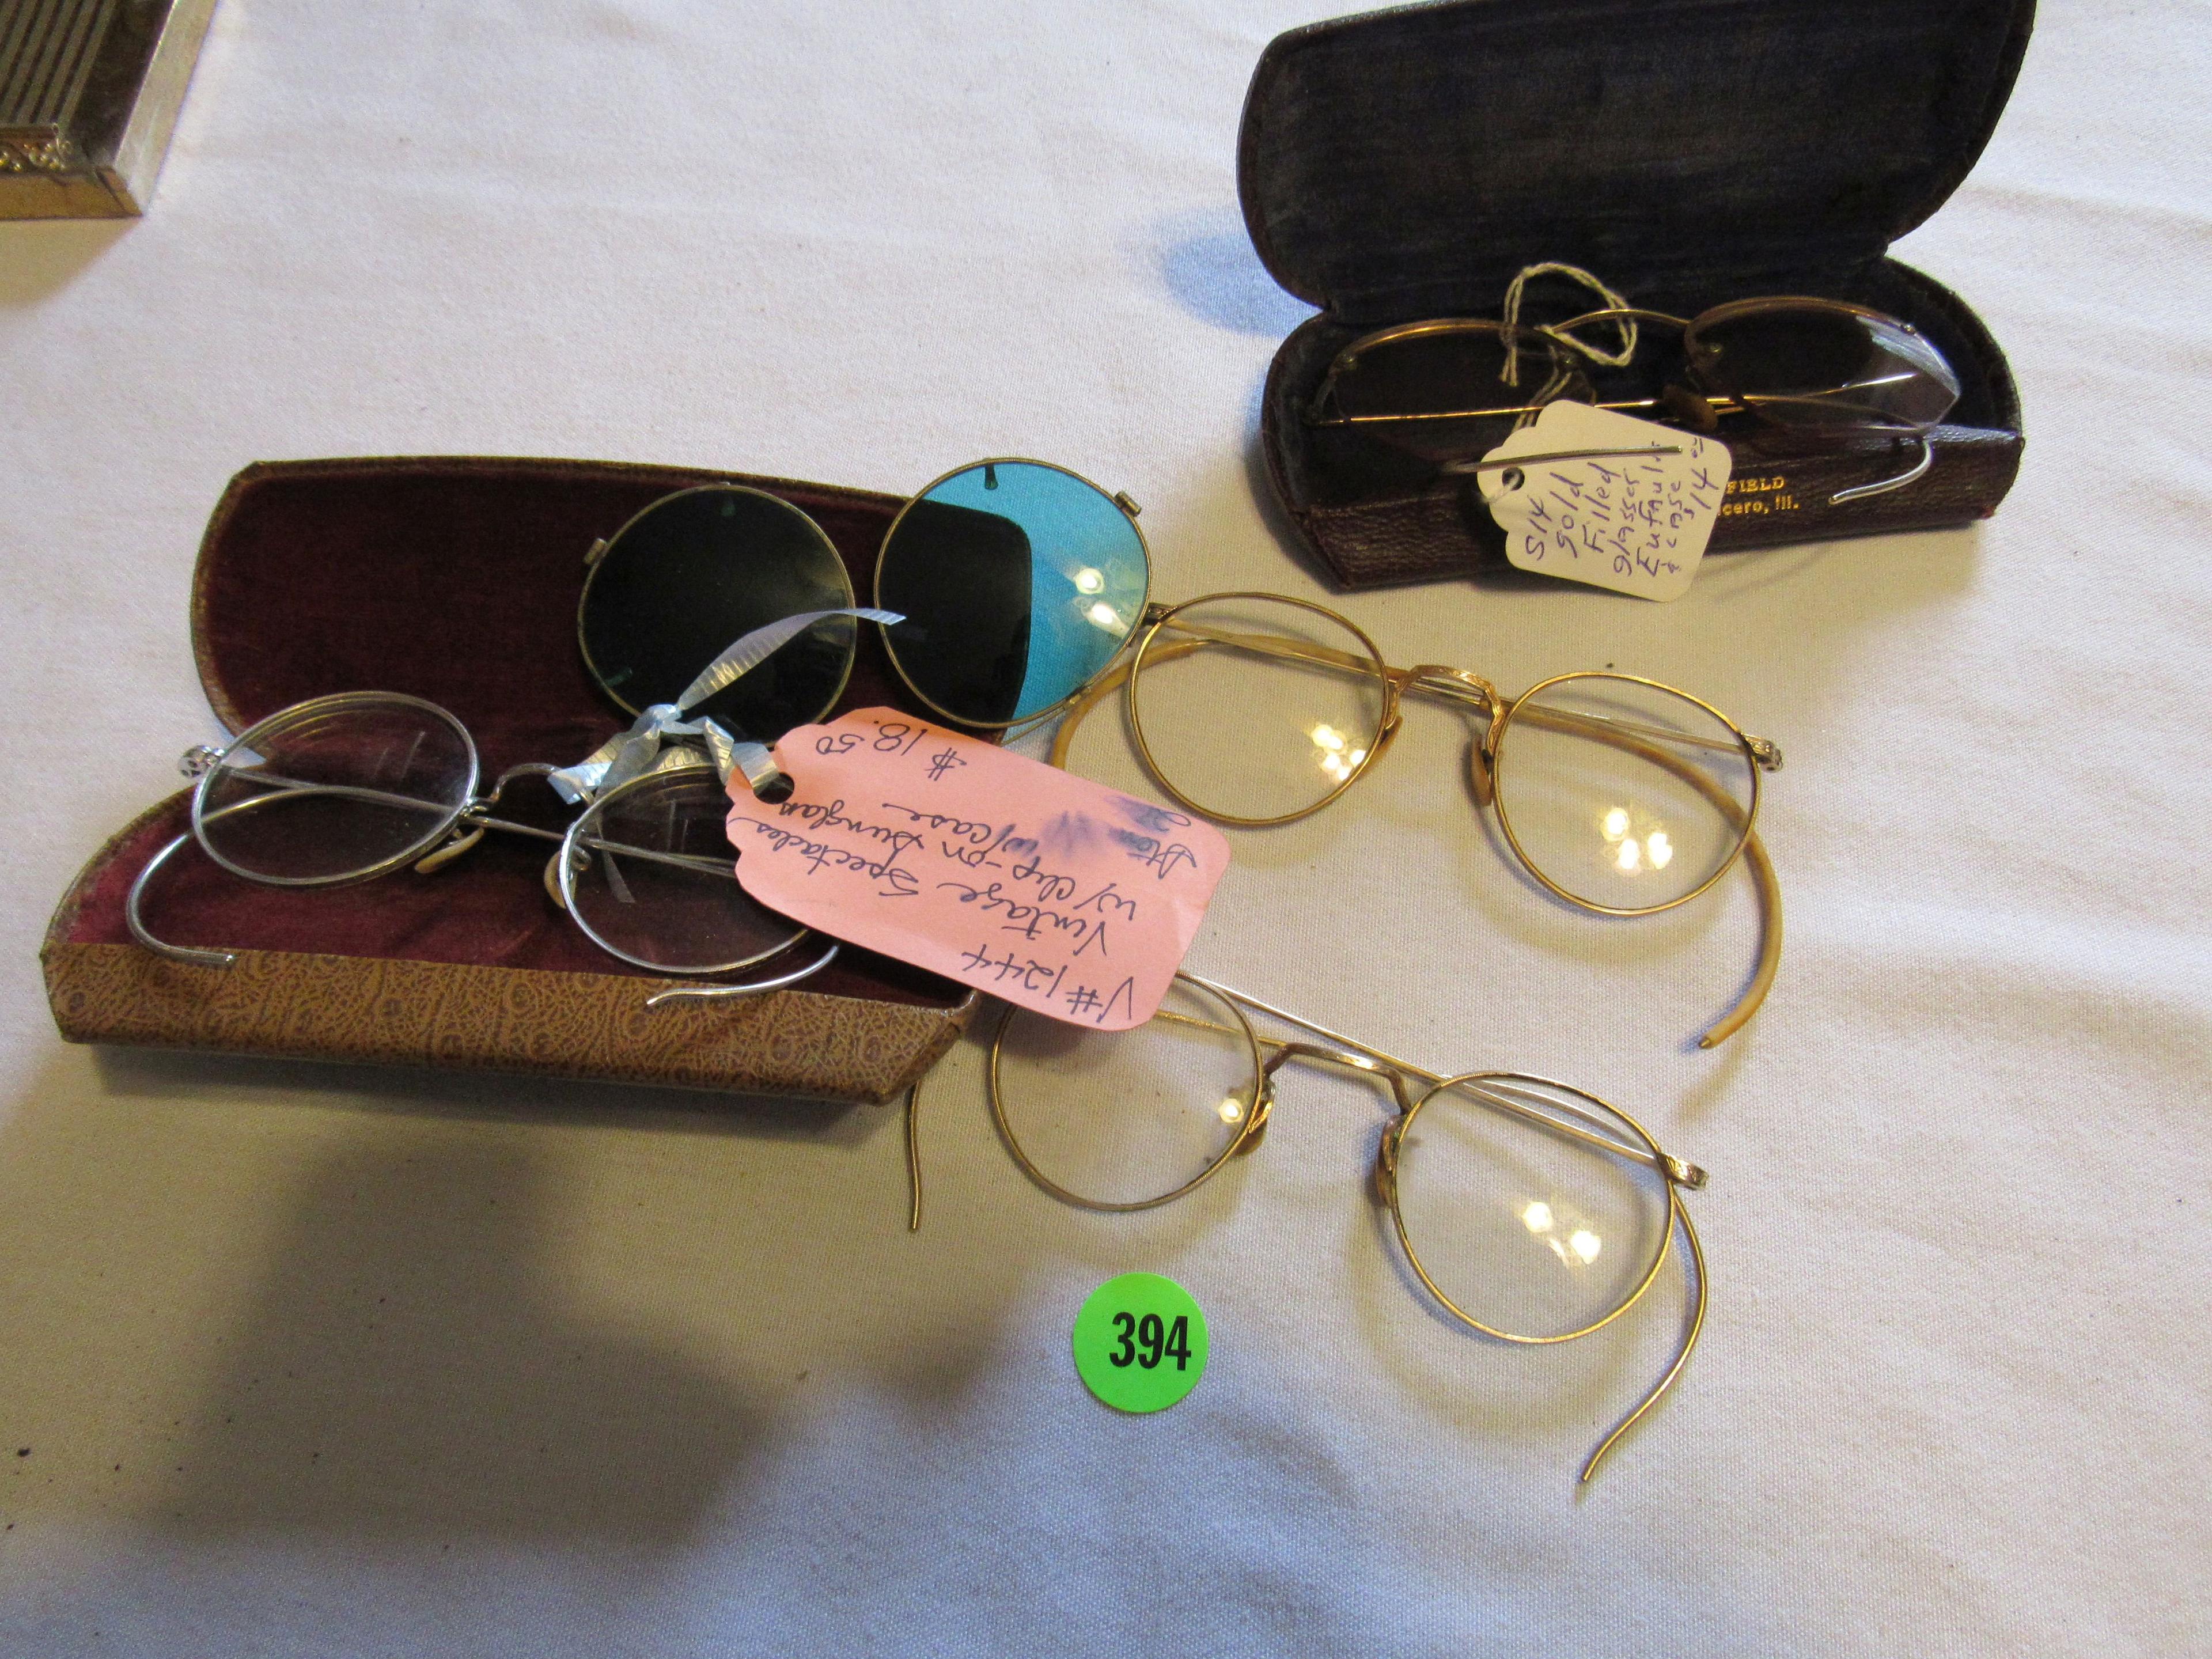 4 pair of vintage spectacles, 1 with clip on sunglasses